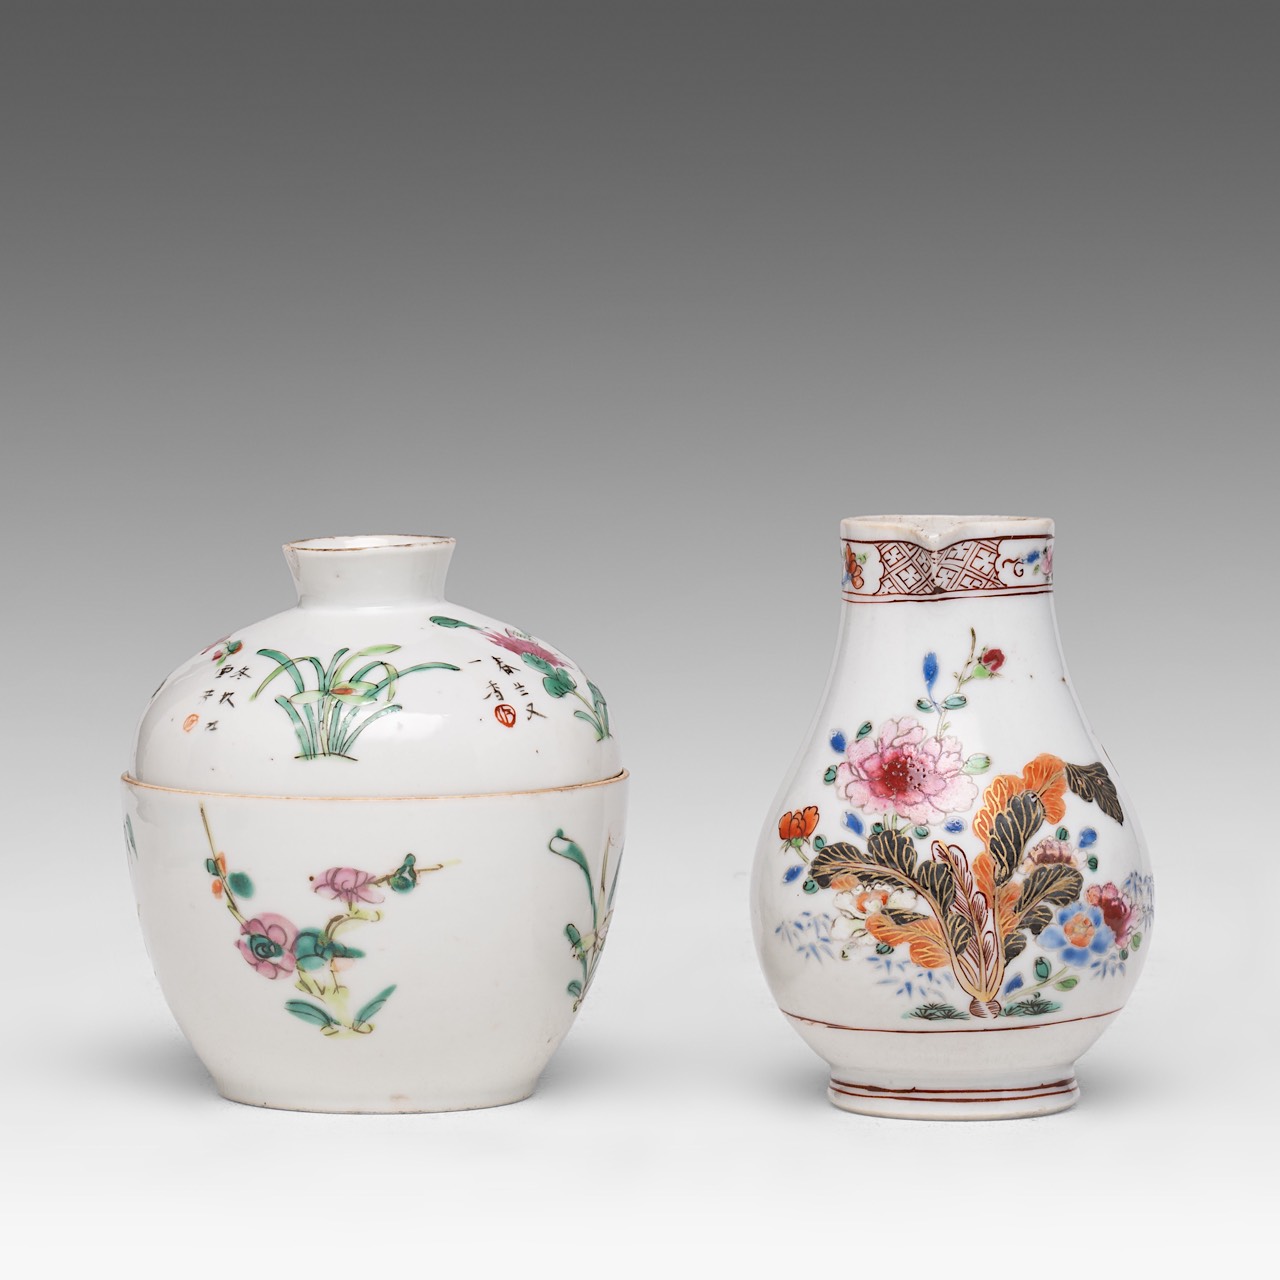 A collection of four Chinese scholar's objects, incl. a brush pot with inscriptions, late 18thC - ad - Image 10 of 29